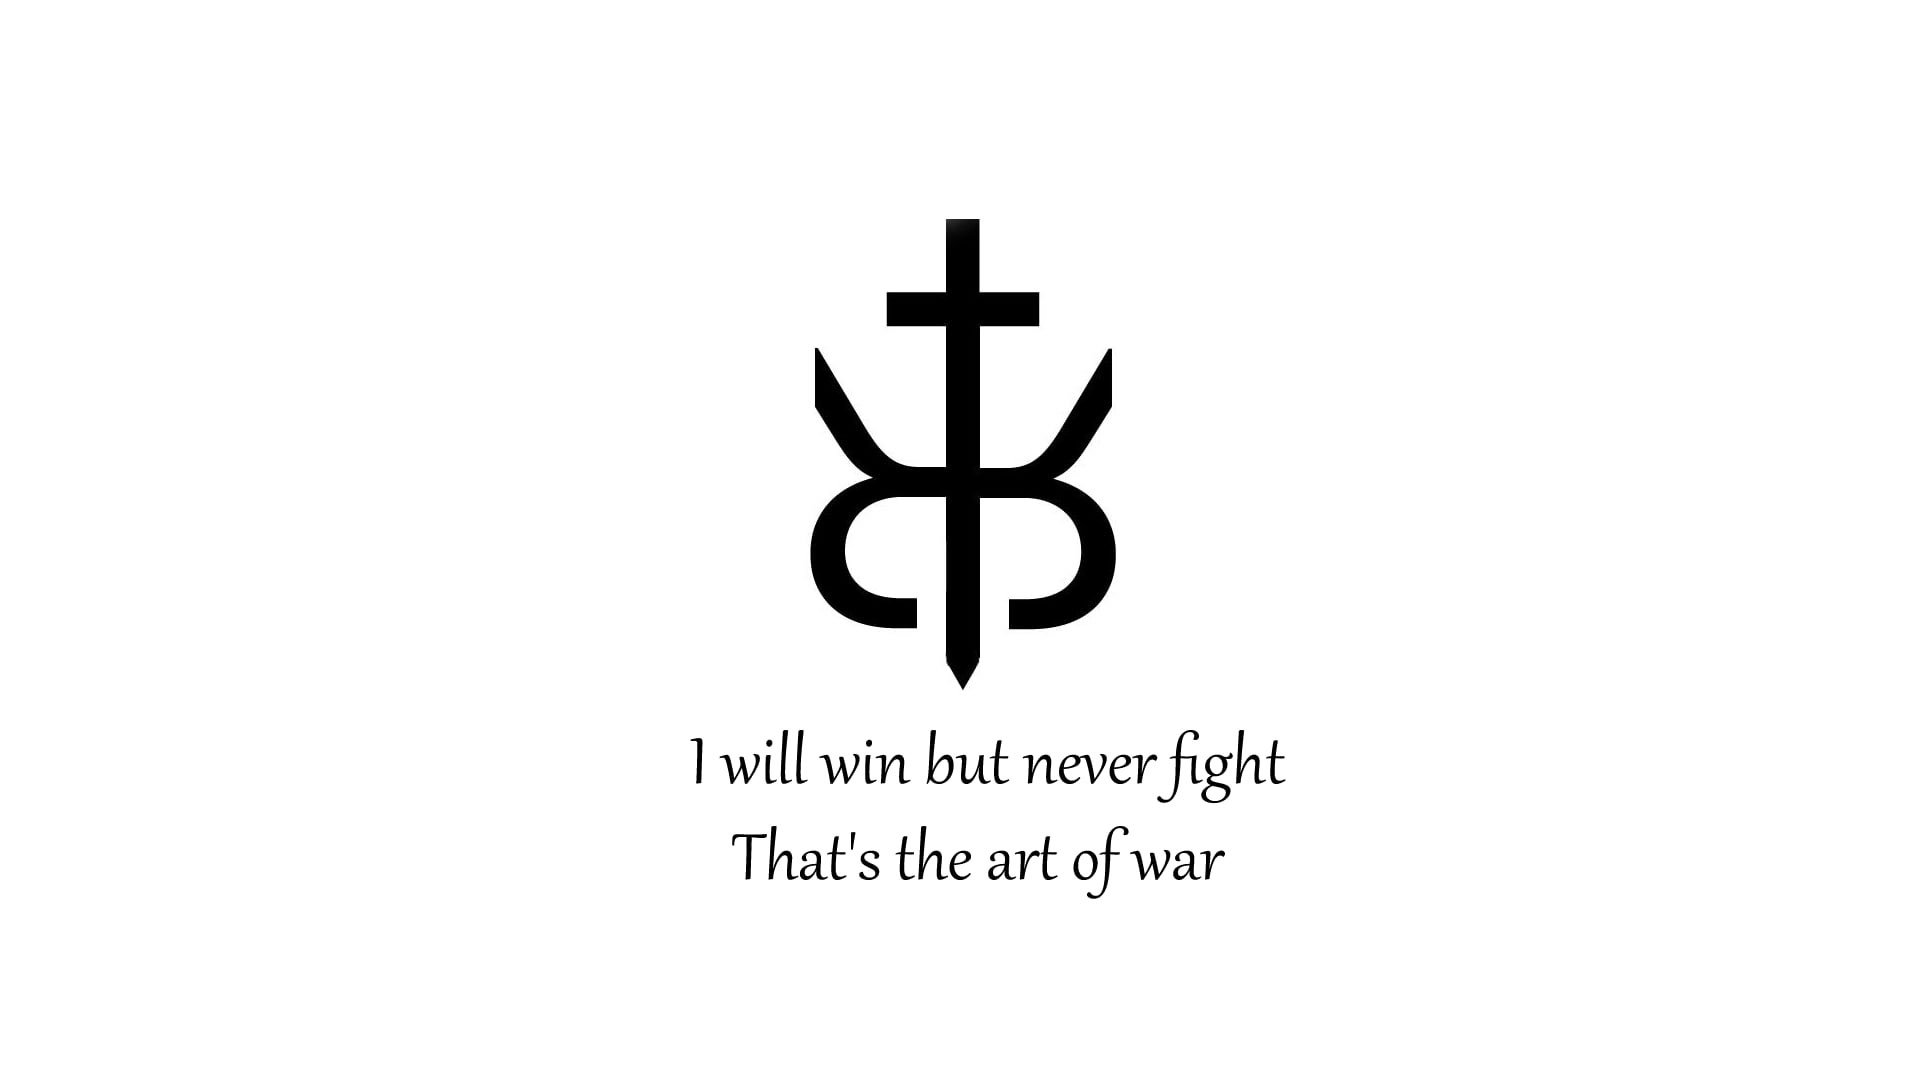 I will win but never fight wallpaper, That’s the art of war